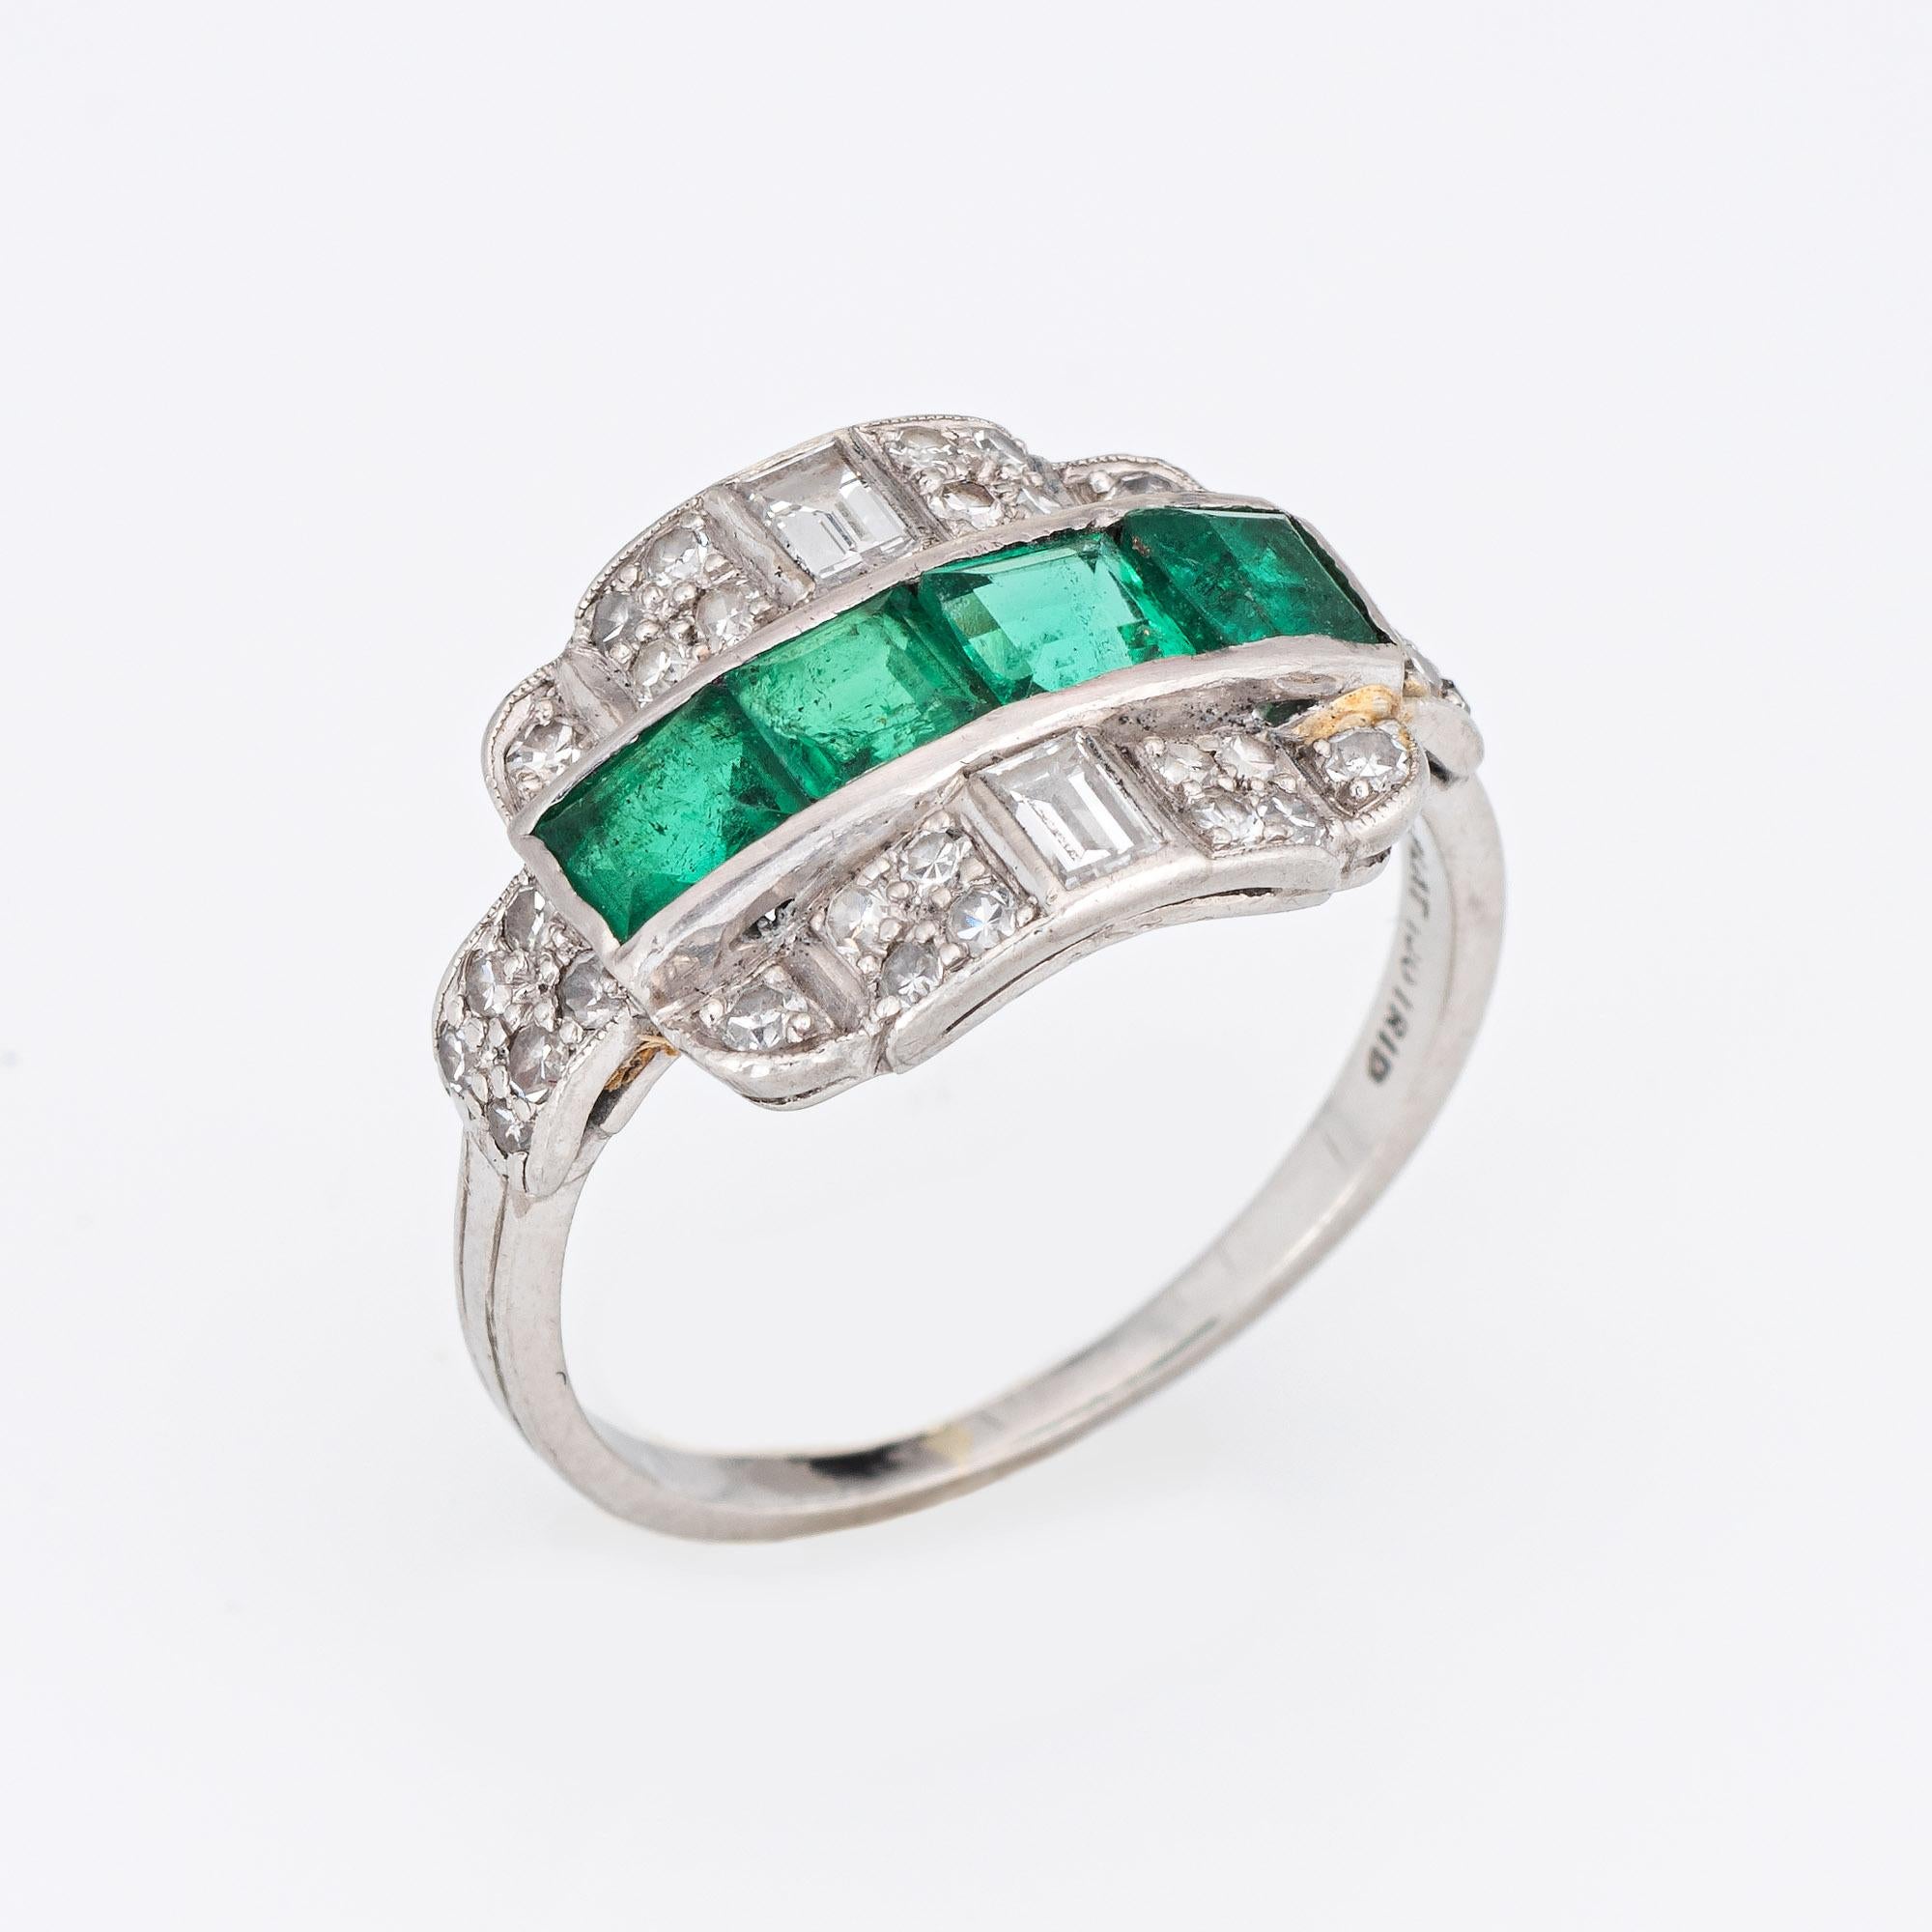 Finely detailed vintage Art Deco emerald 7 diamond ring (circa 1920s to 1930s) crafted in platinum. 

Four emeralds are estimated at 0.20 carats each (0.80 carats total estimated weight). Two square cut diamonds are estimated at 0.10 carats each,